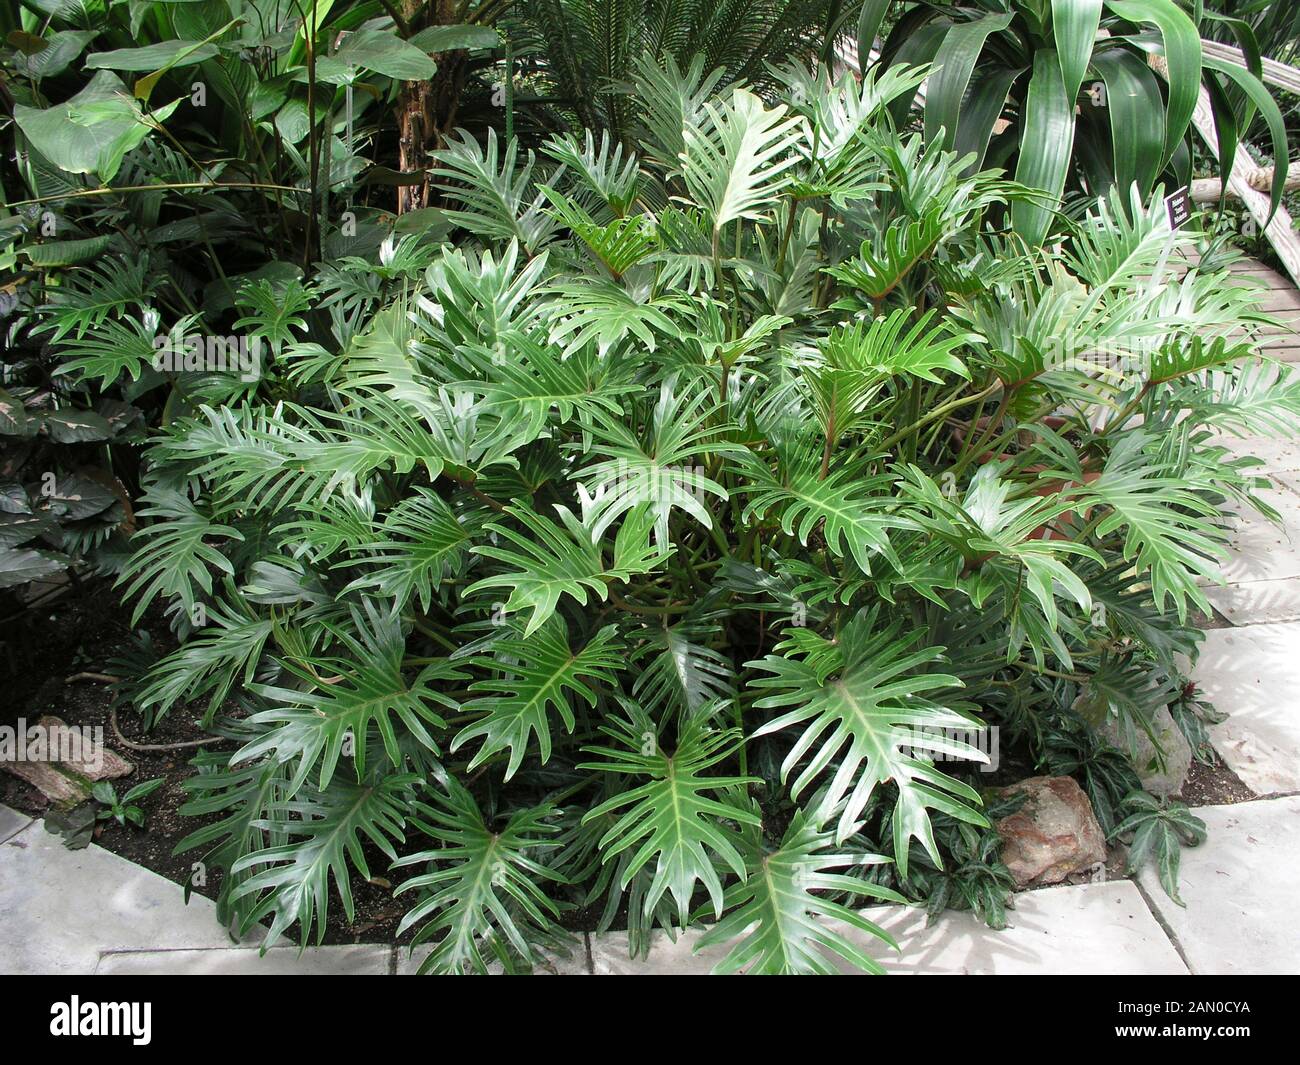 Philodendron Xanadu High Resolution Stock Photography and Images - Alamy